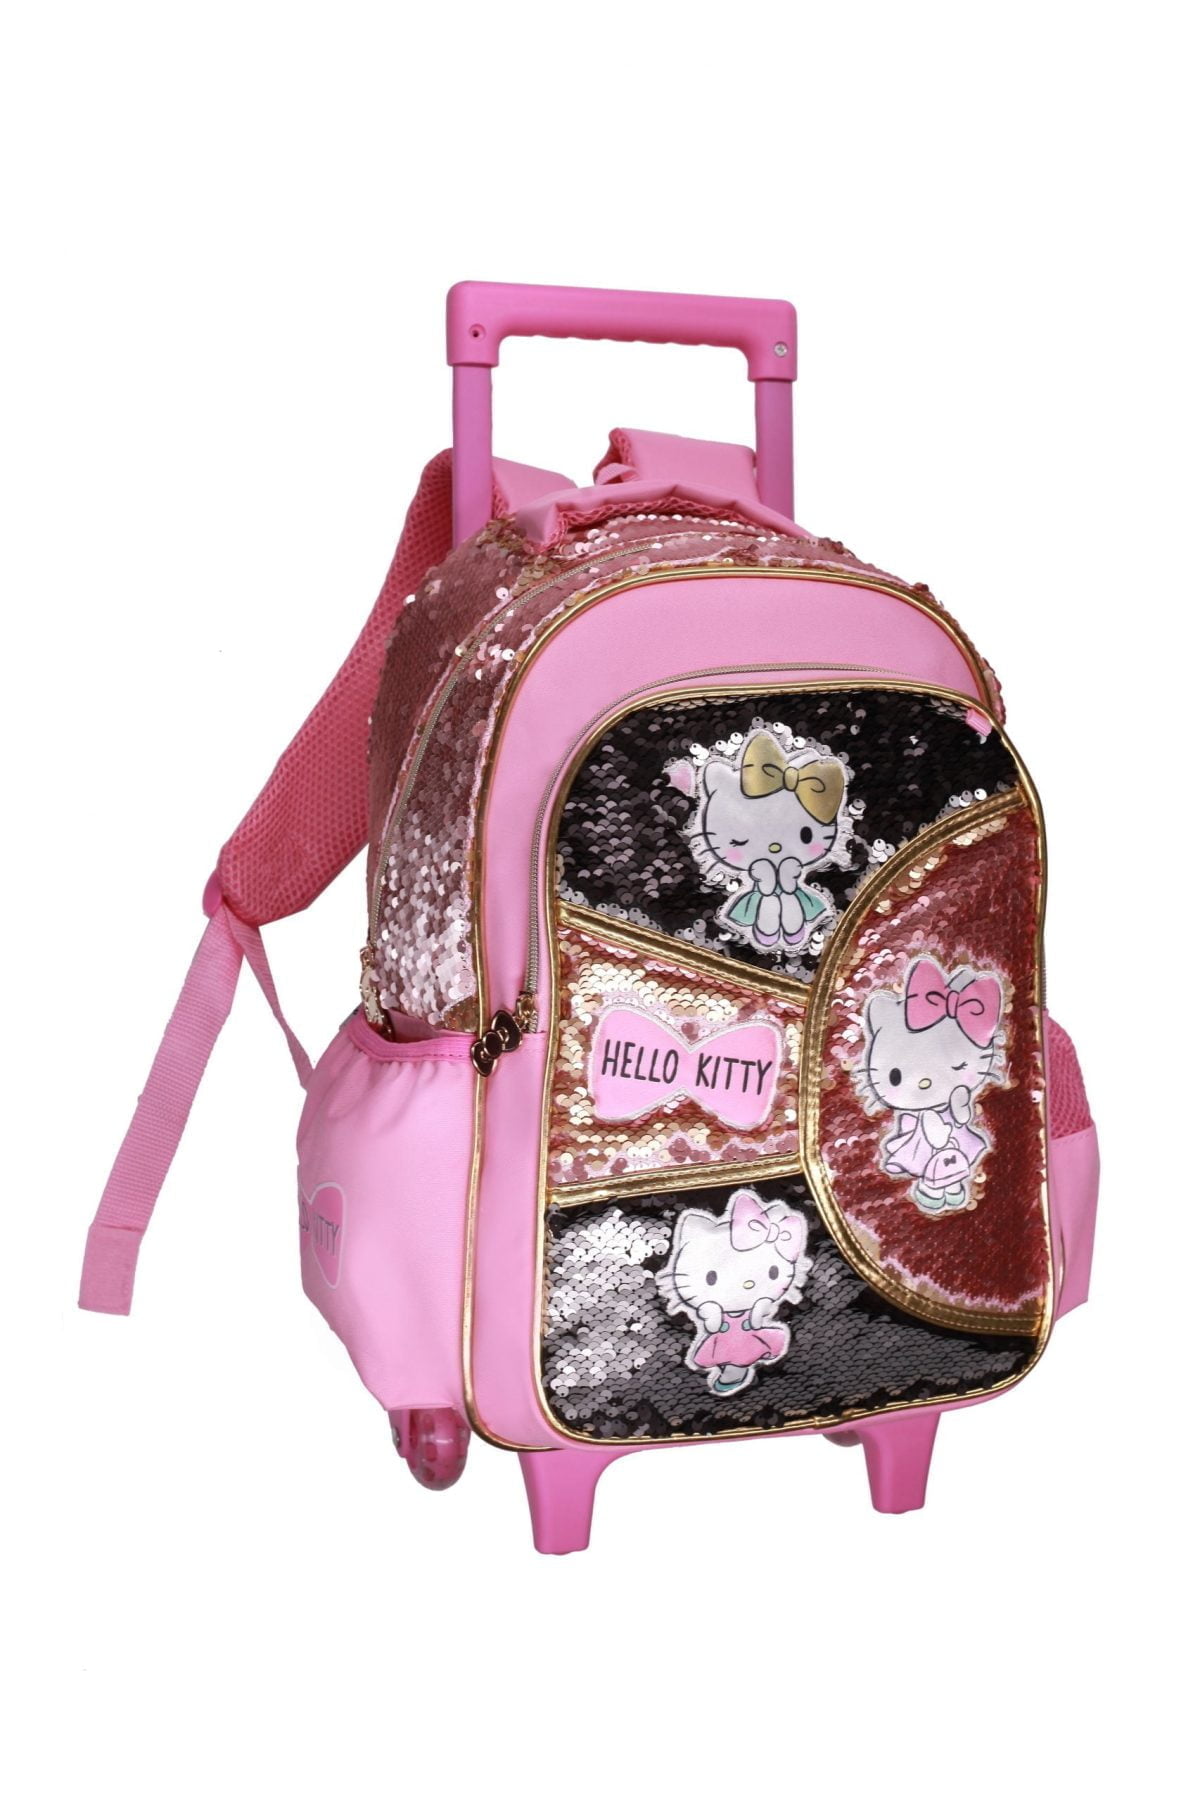 Hk674 3090T 3 Scaled Hello Kitty The Trolley Bag Is A Reliable Companion For Your Journey. The Trolley Features Main Zip Compartment To Keep Your Child'S Belonging Or School Items. The Trolley Has Comfortable Handle On The Top. The Fine Quality Material And Printing Makes It Durable And Stylish Option. It Is Easy To Zip And Unzip With Smooth Zippers And Pullers. The Wheels On The Bottom Make It Easy To Drag. Wipe With A Clean And Dry Cloth. &Lt;Ul&Gt; &Lt;Li&Gt; Adorable Hello Kitty Print Backpack For Your Little One&Lt;/Li&Gt; &Lt;Li&Gt;Perfect For School, Picnic And More&Lt;/Li&Gt; &Lt;Li&Gt;Offers Plenty Of Space To Store Kid'S Essentials&Lt;/Li&Gt; &Lt;/Ul&Gt; Hello Kitty Trolley Bag Hello Kitty Trolley Bag 15&Quot; - 2 Main Compartments And 2 Side Pockets (Hk674) With Hello Kitty Pencil Case